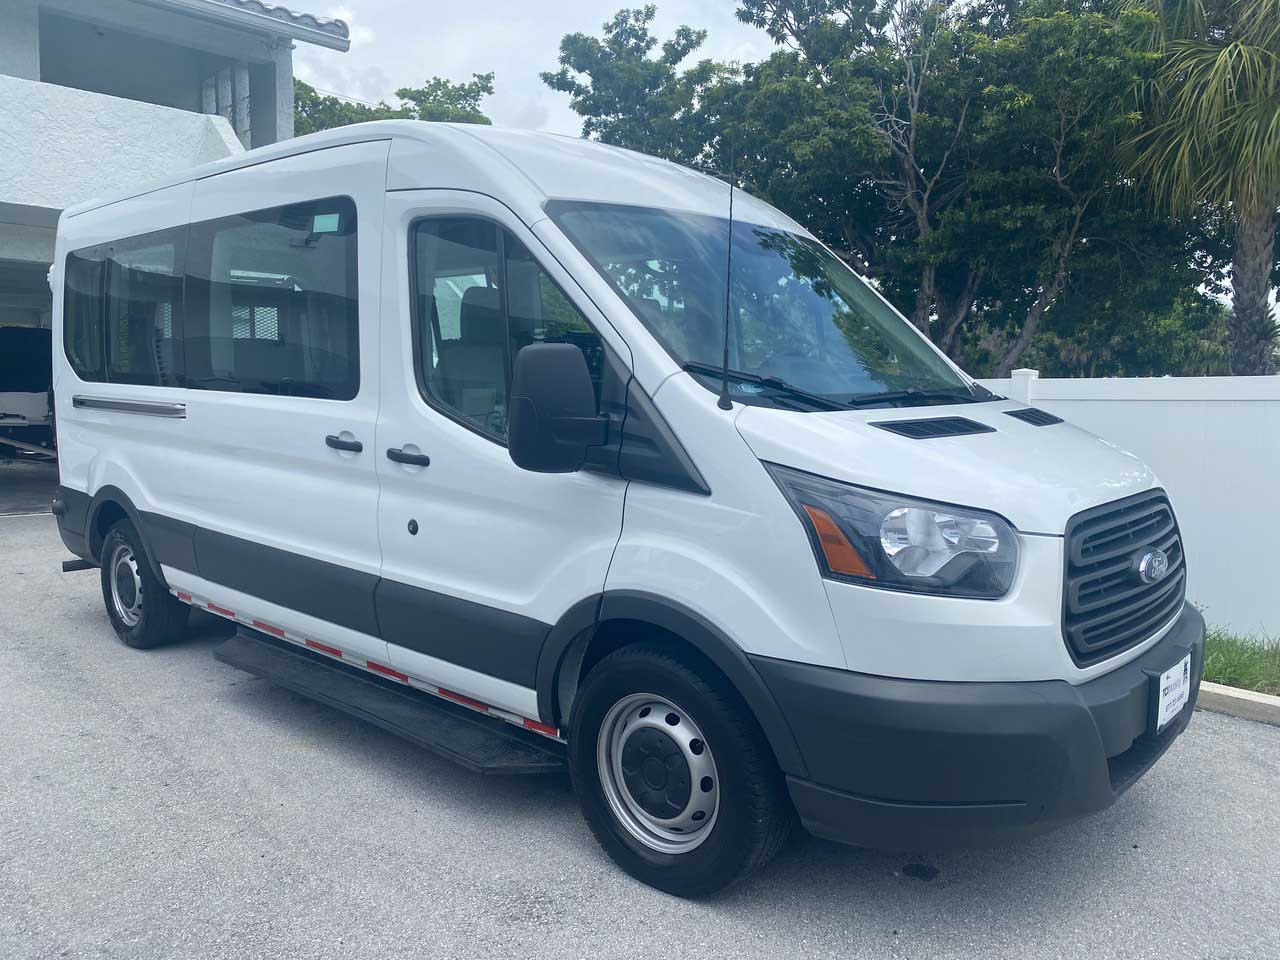 PreOwned 2018 Ford Transit 350 Wagon In Stock Inventory of Custom